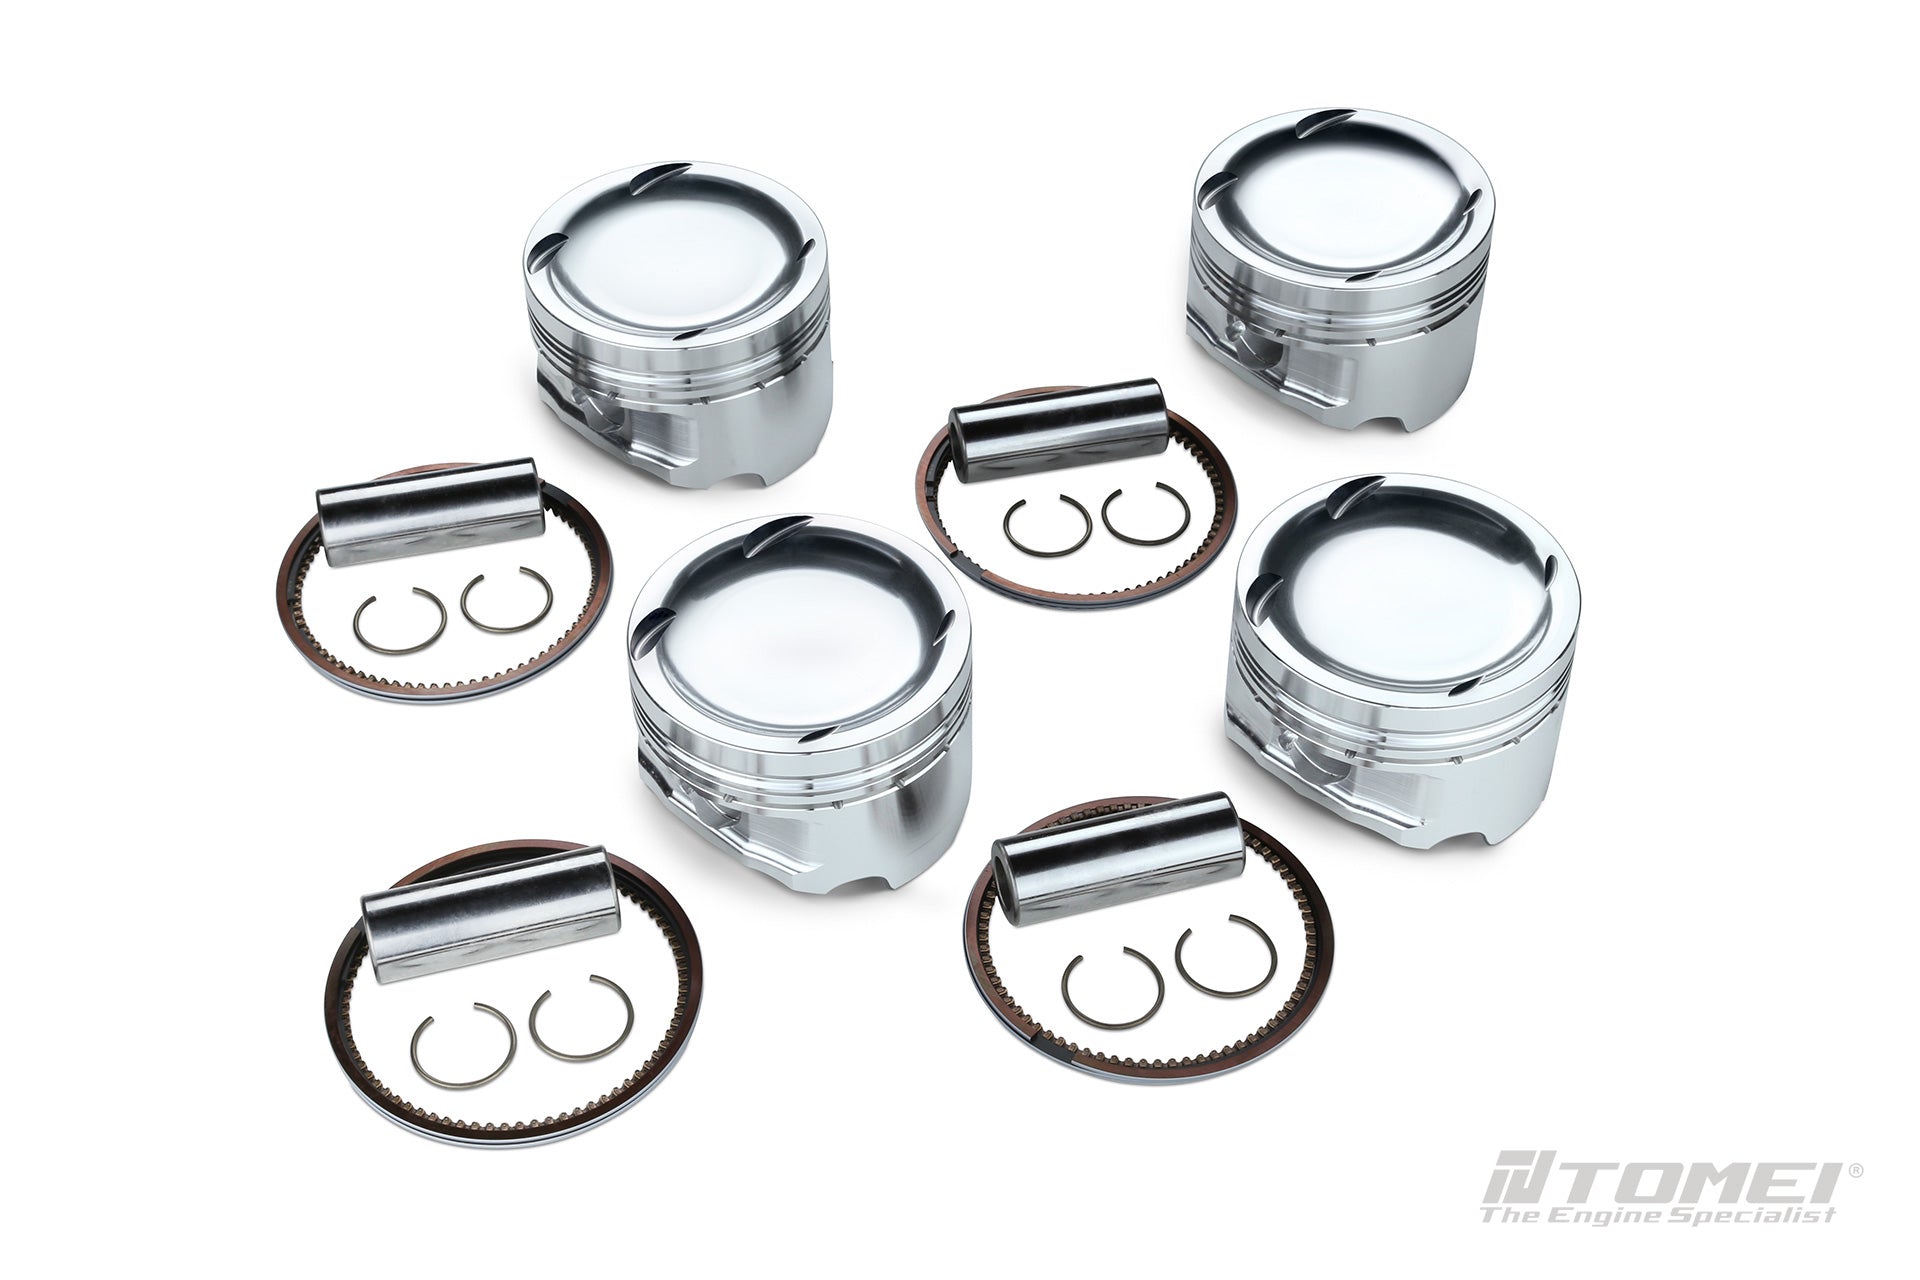 TOMEI FORGED PISTON KIT 4G63 2.2 86.00mm (Previous Part Number 1151860212)